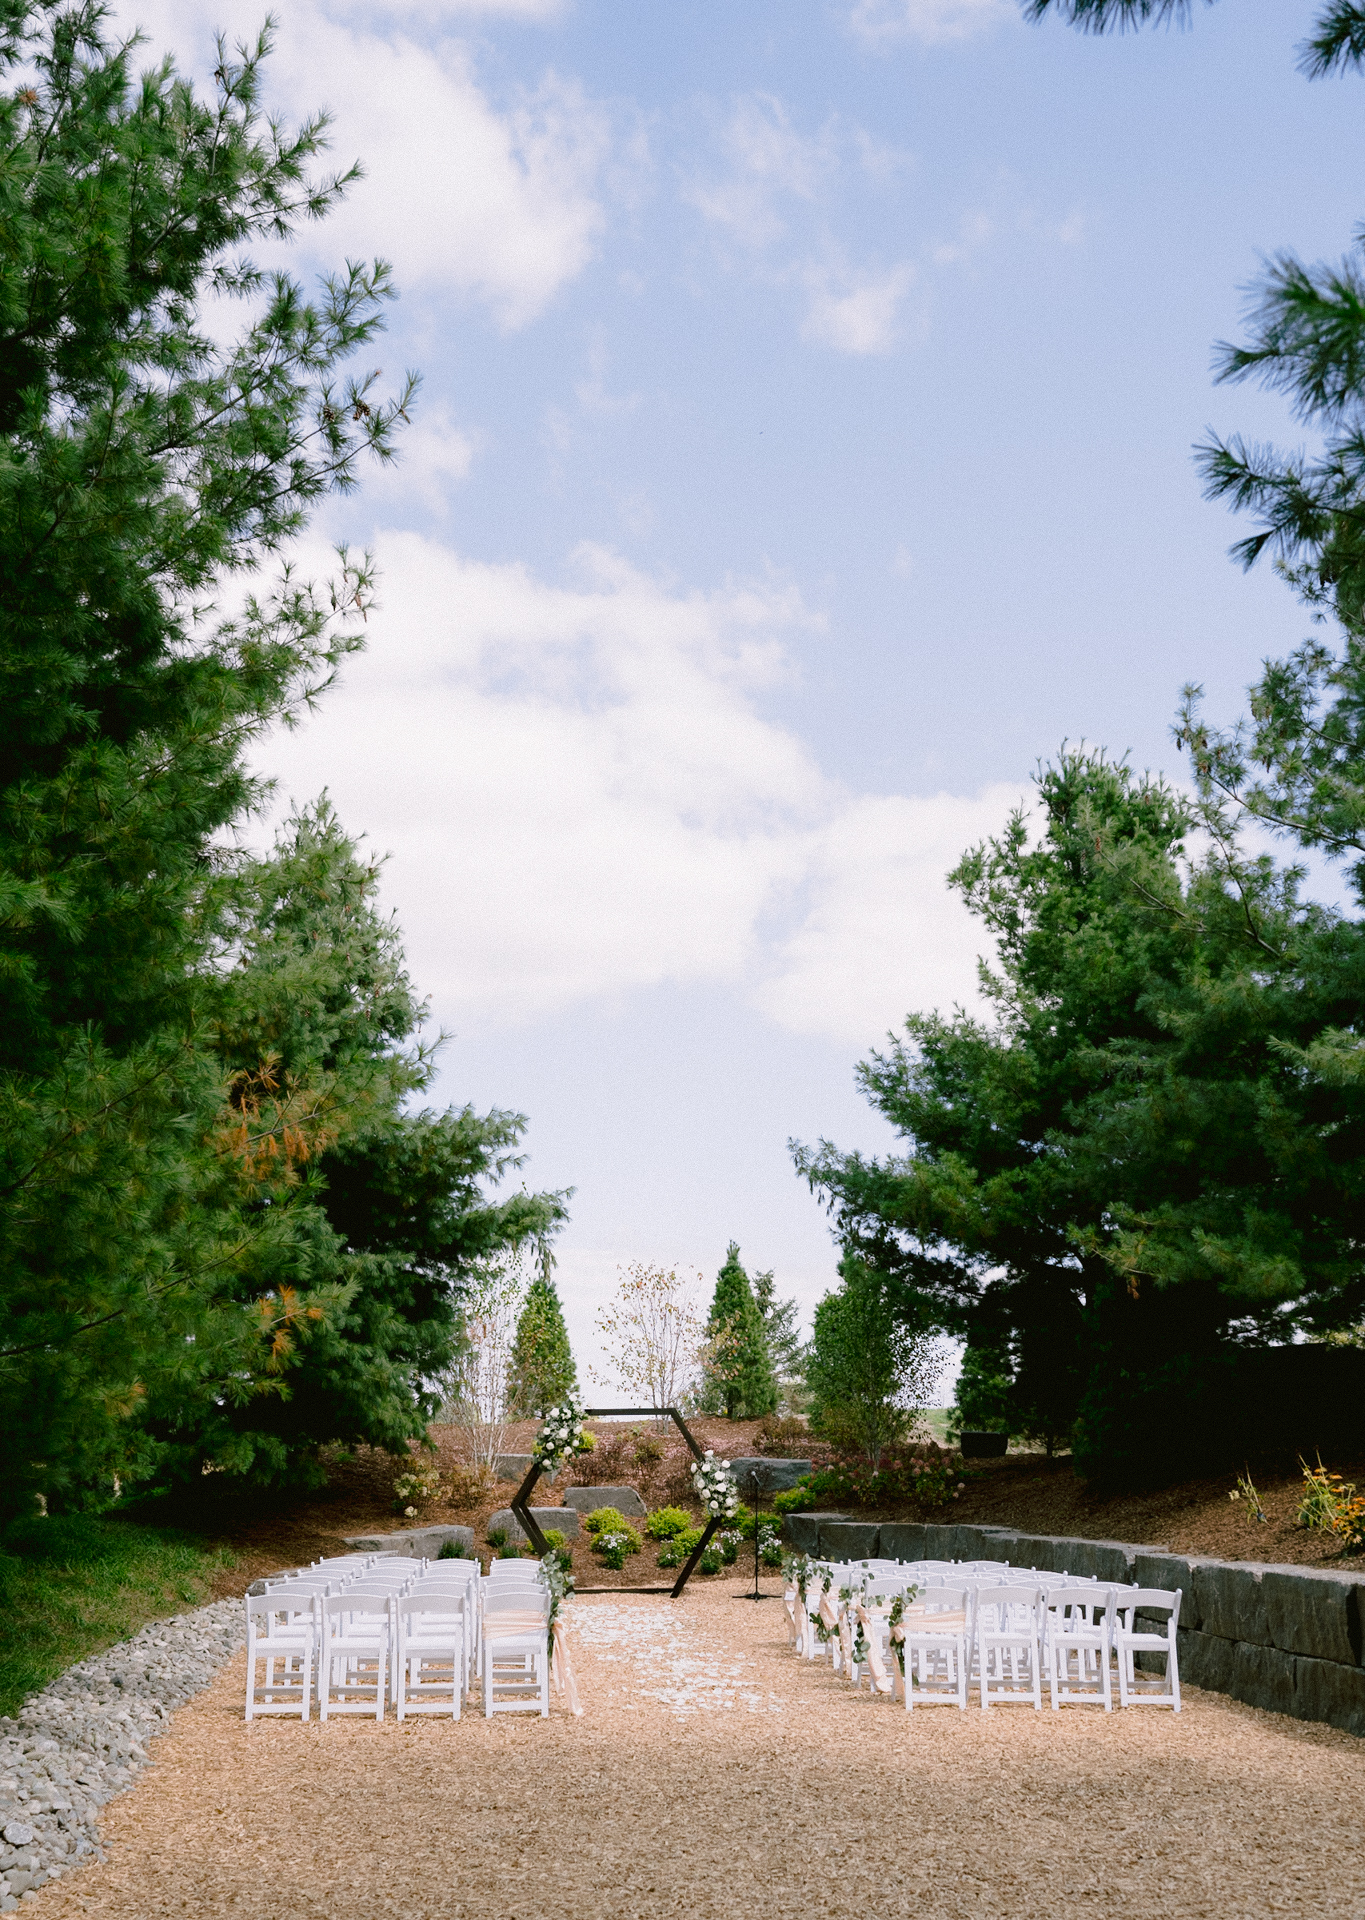 Outdoor wedding ceremony setup with white chairs arranged on a gravel path, surrounded by greenery under a clear sky at Cambium Farms.